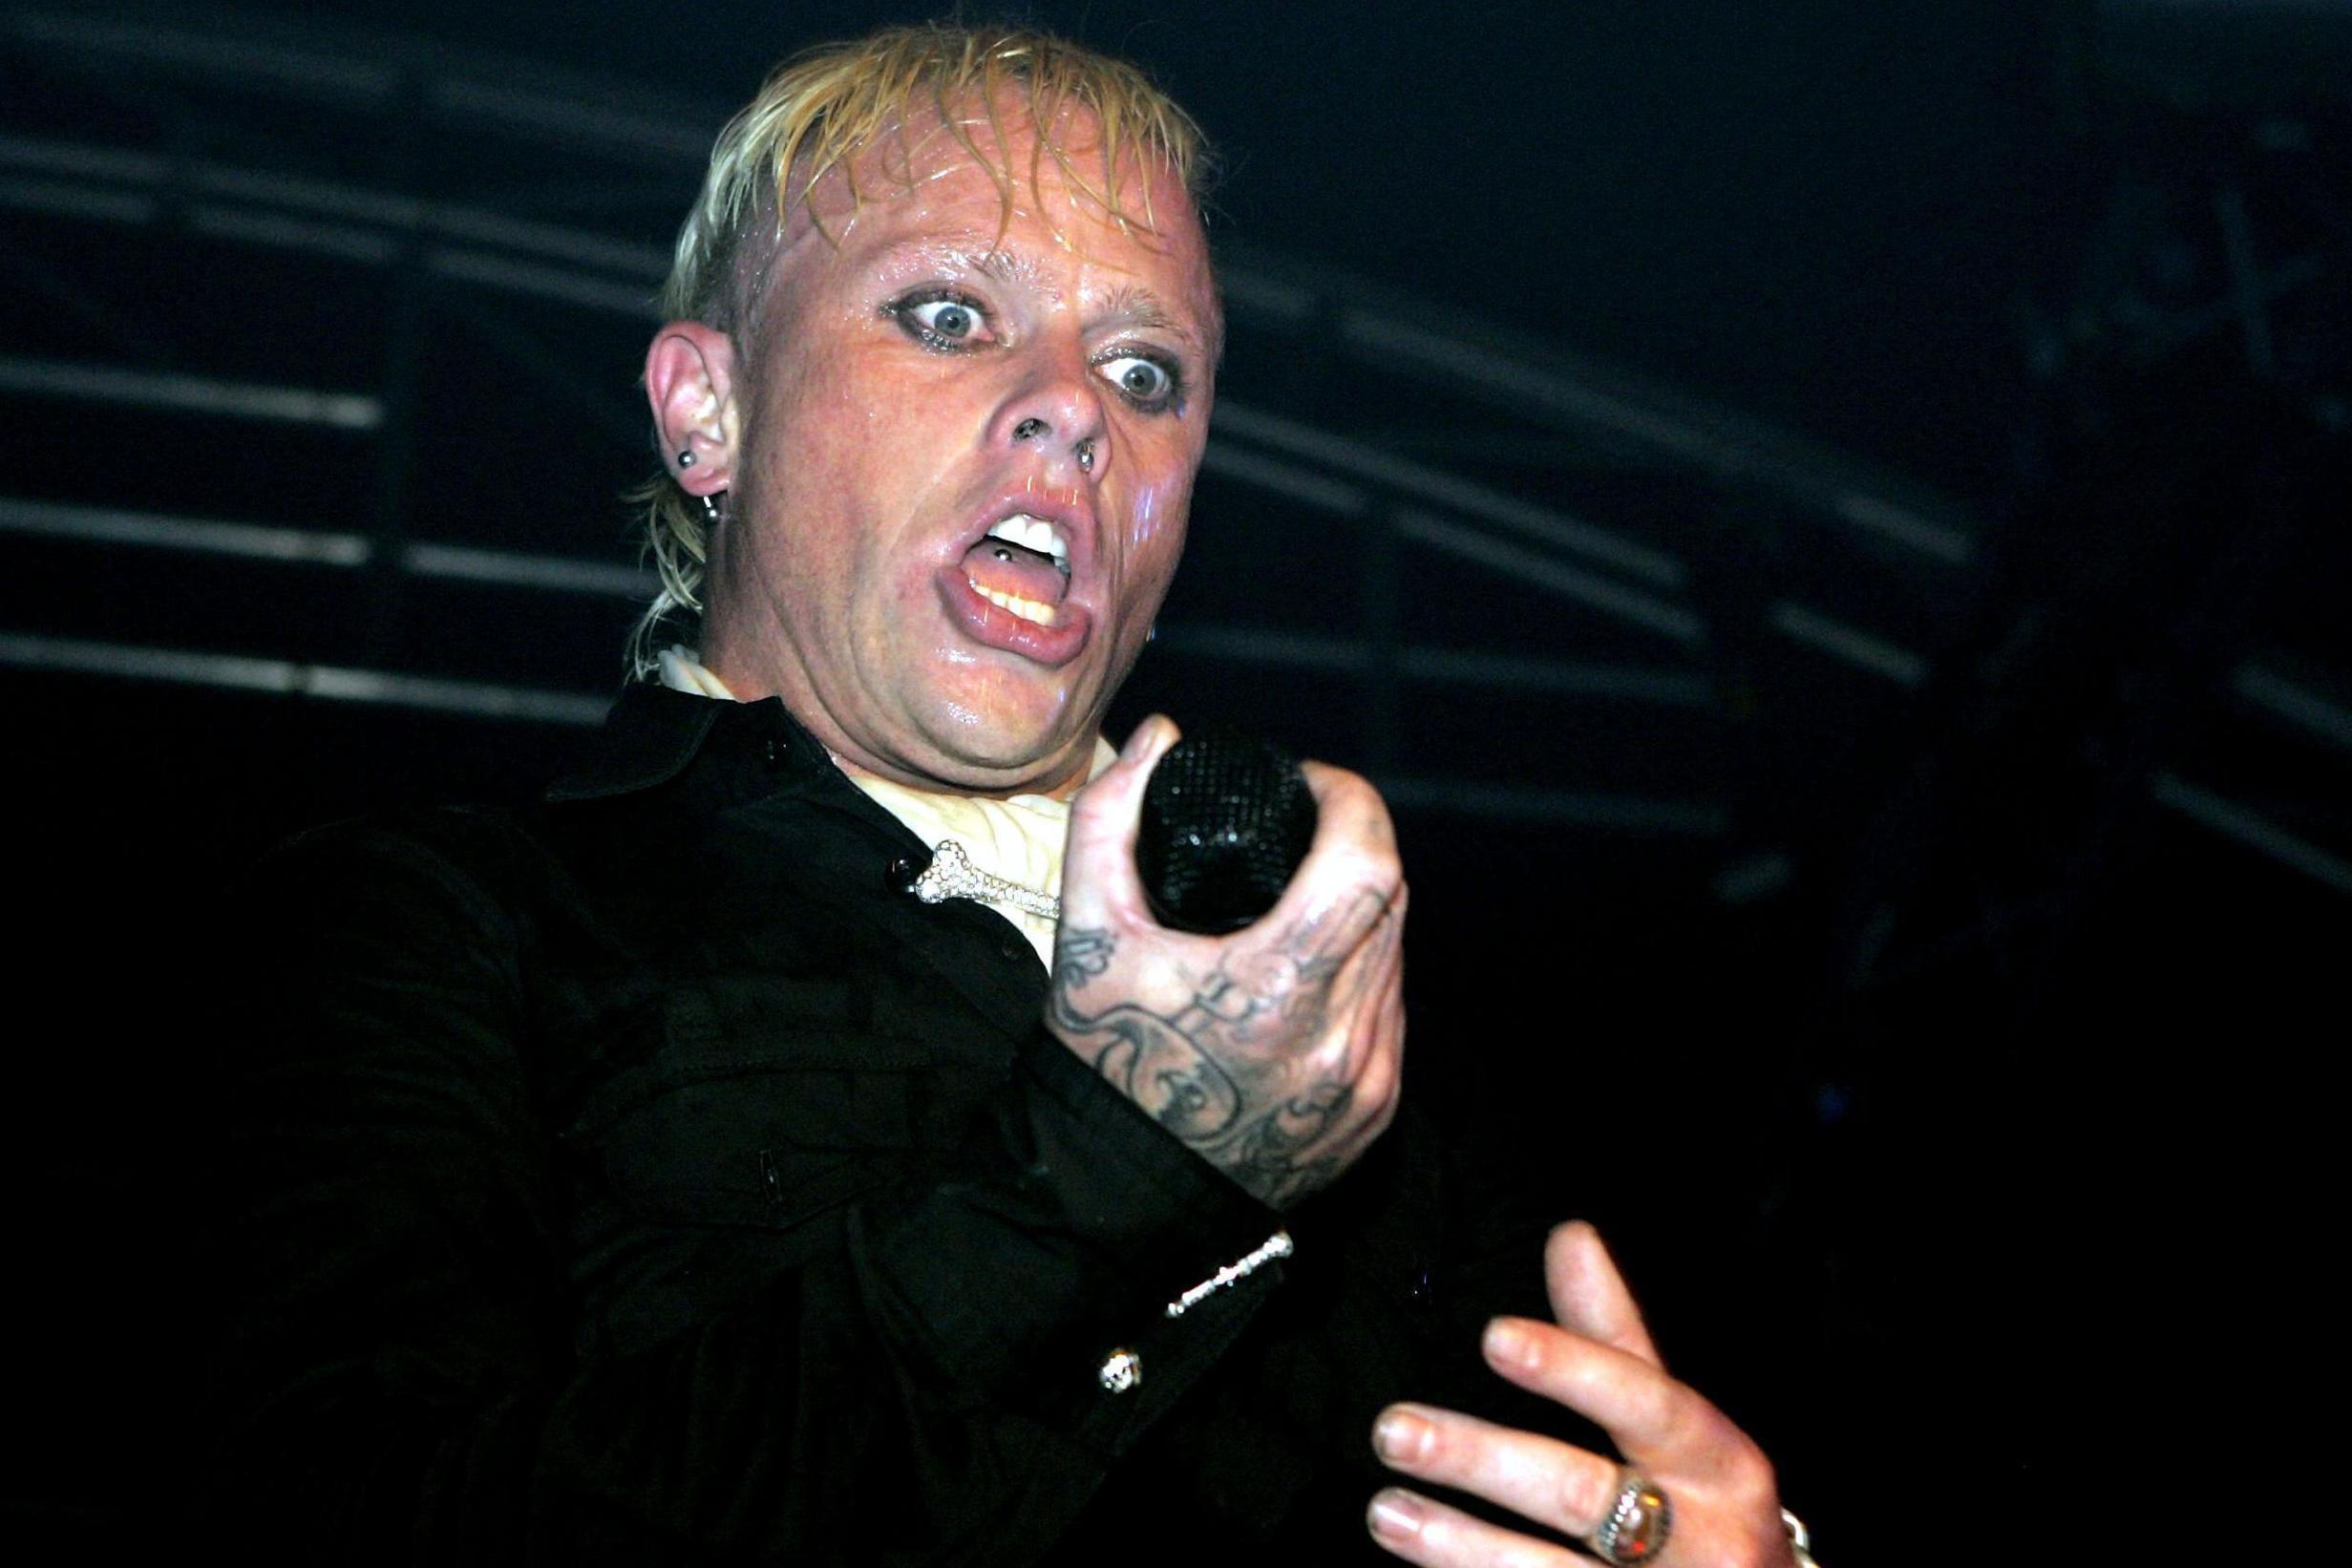 Twisted firestarter: Keith Flint of the Prodigy